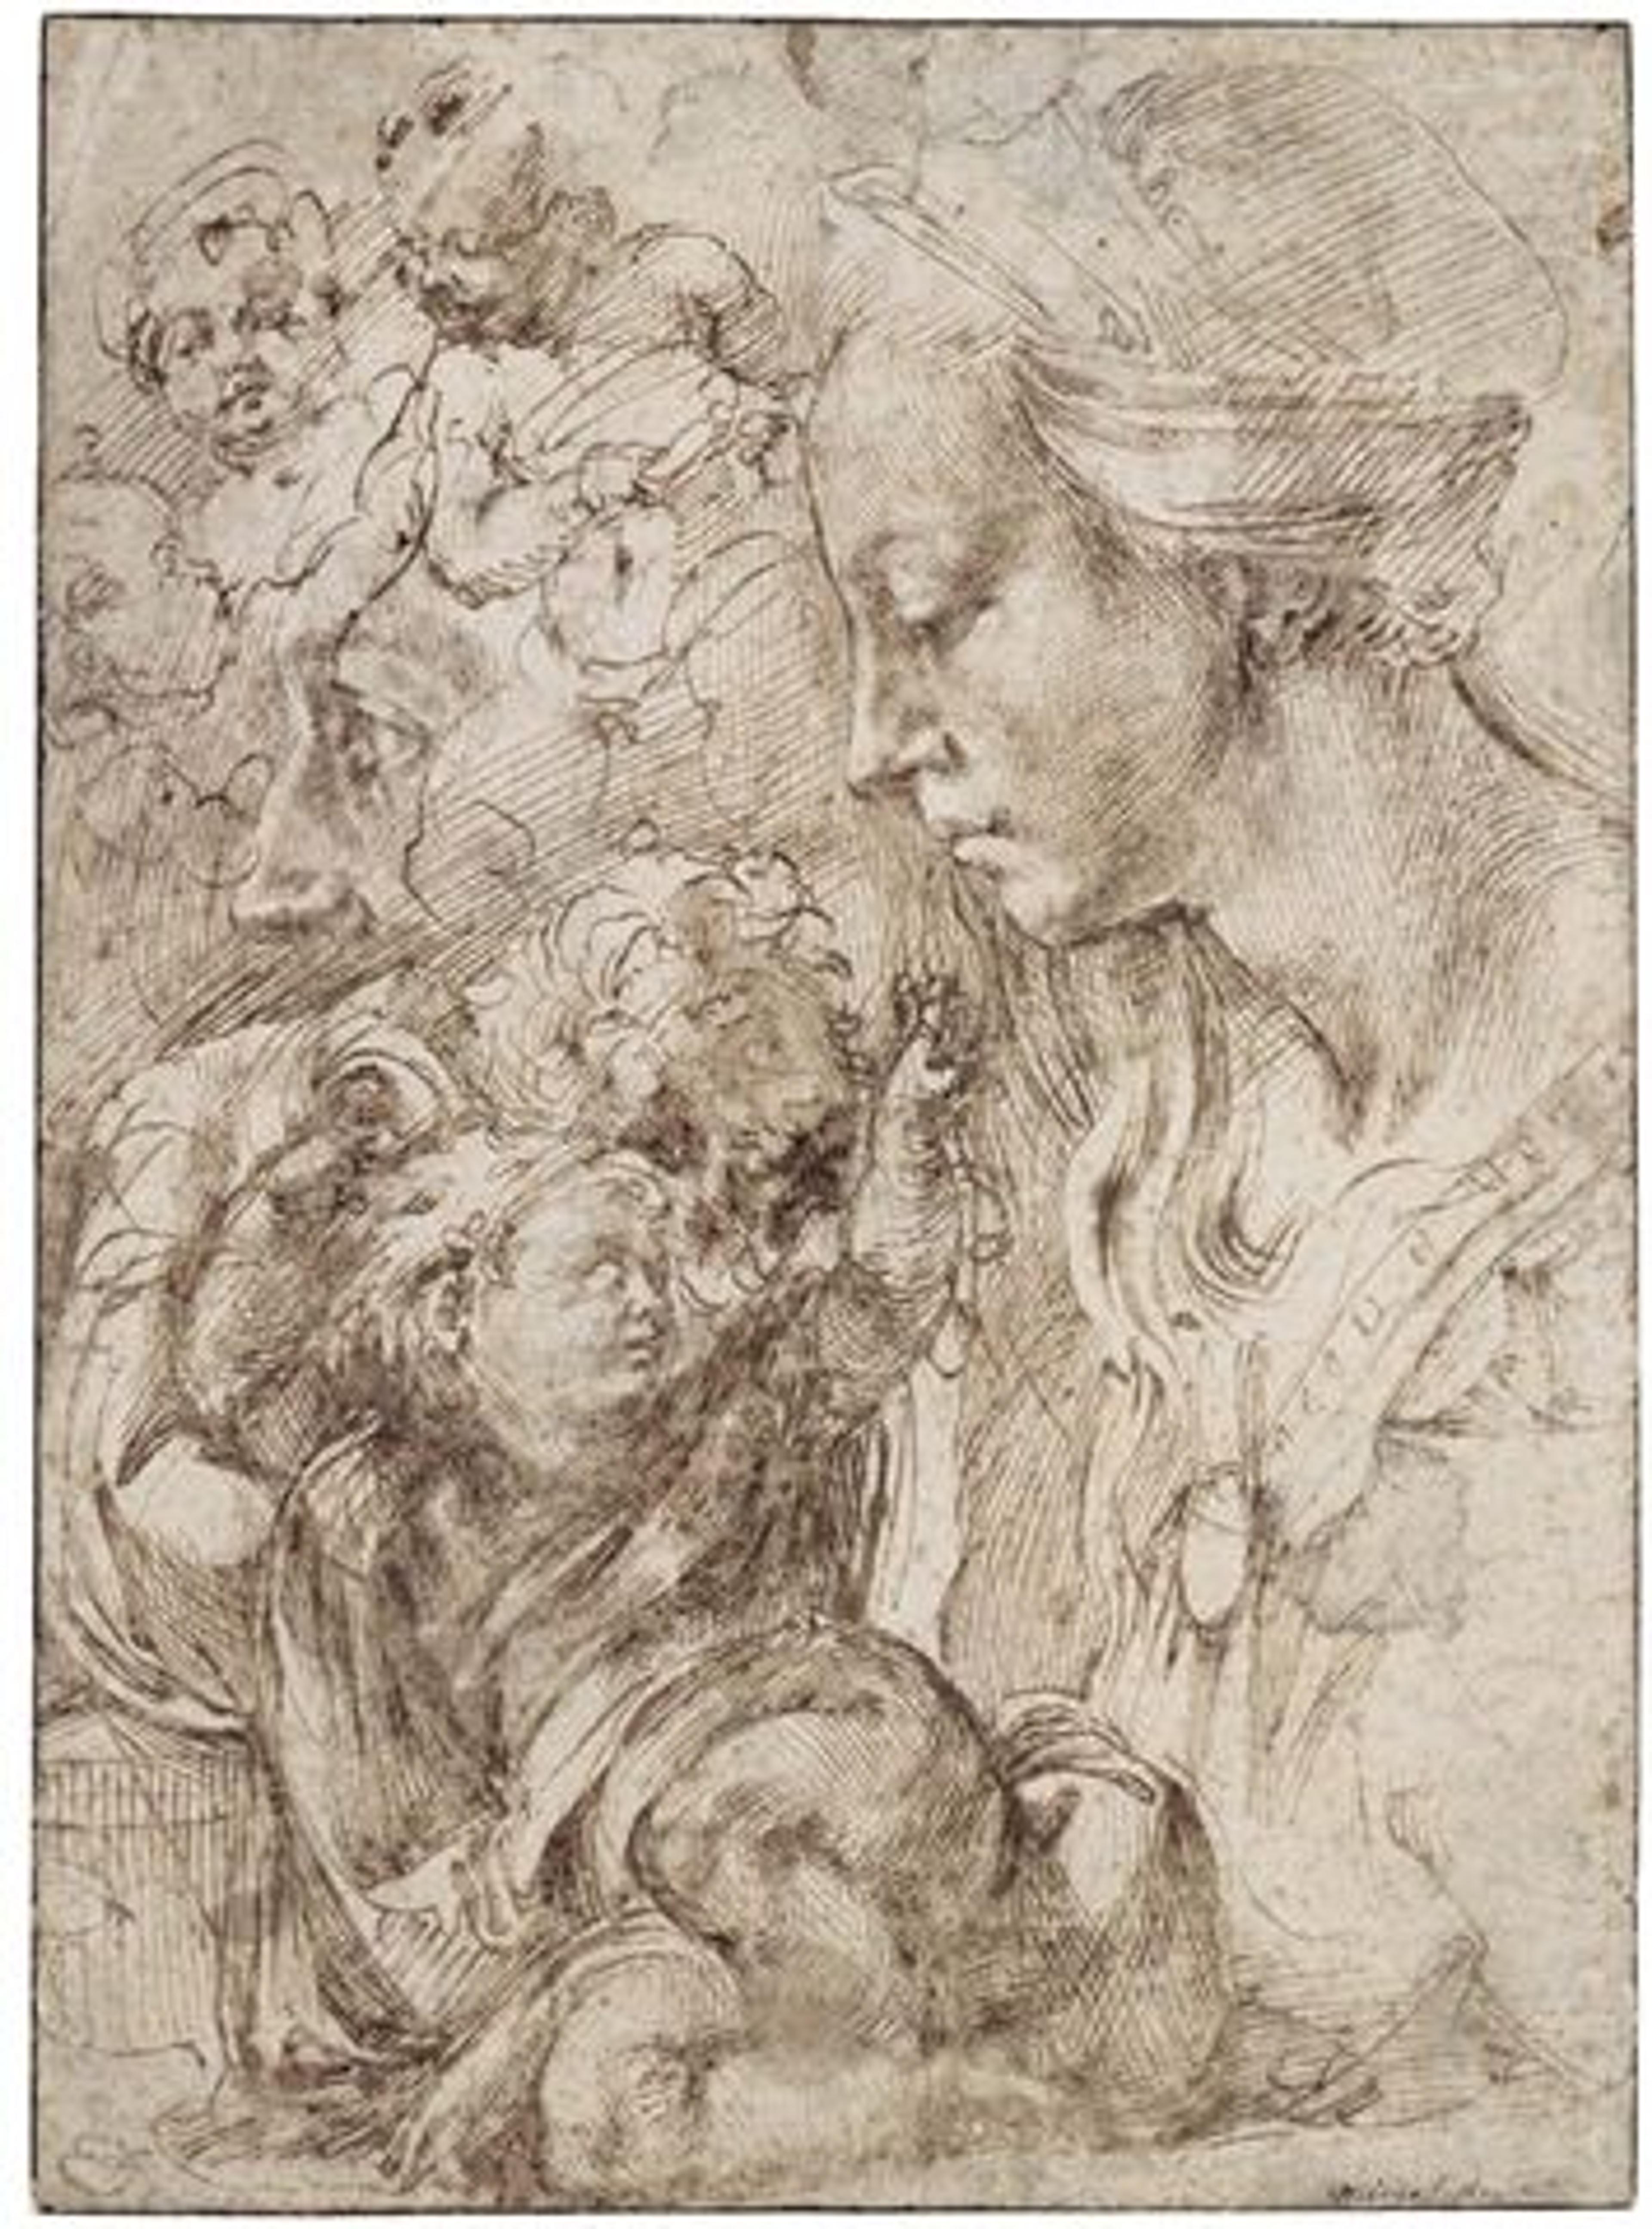 Michelangelo's sketches of the Virgin, the Christ Child reclining on a cushion, and other sketches of infants